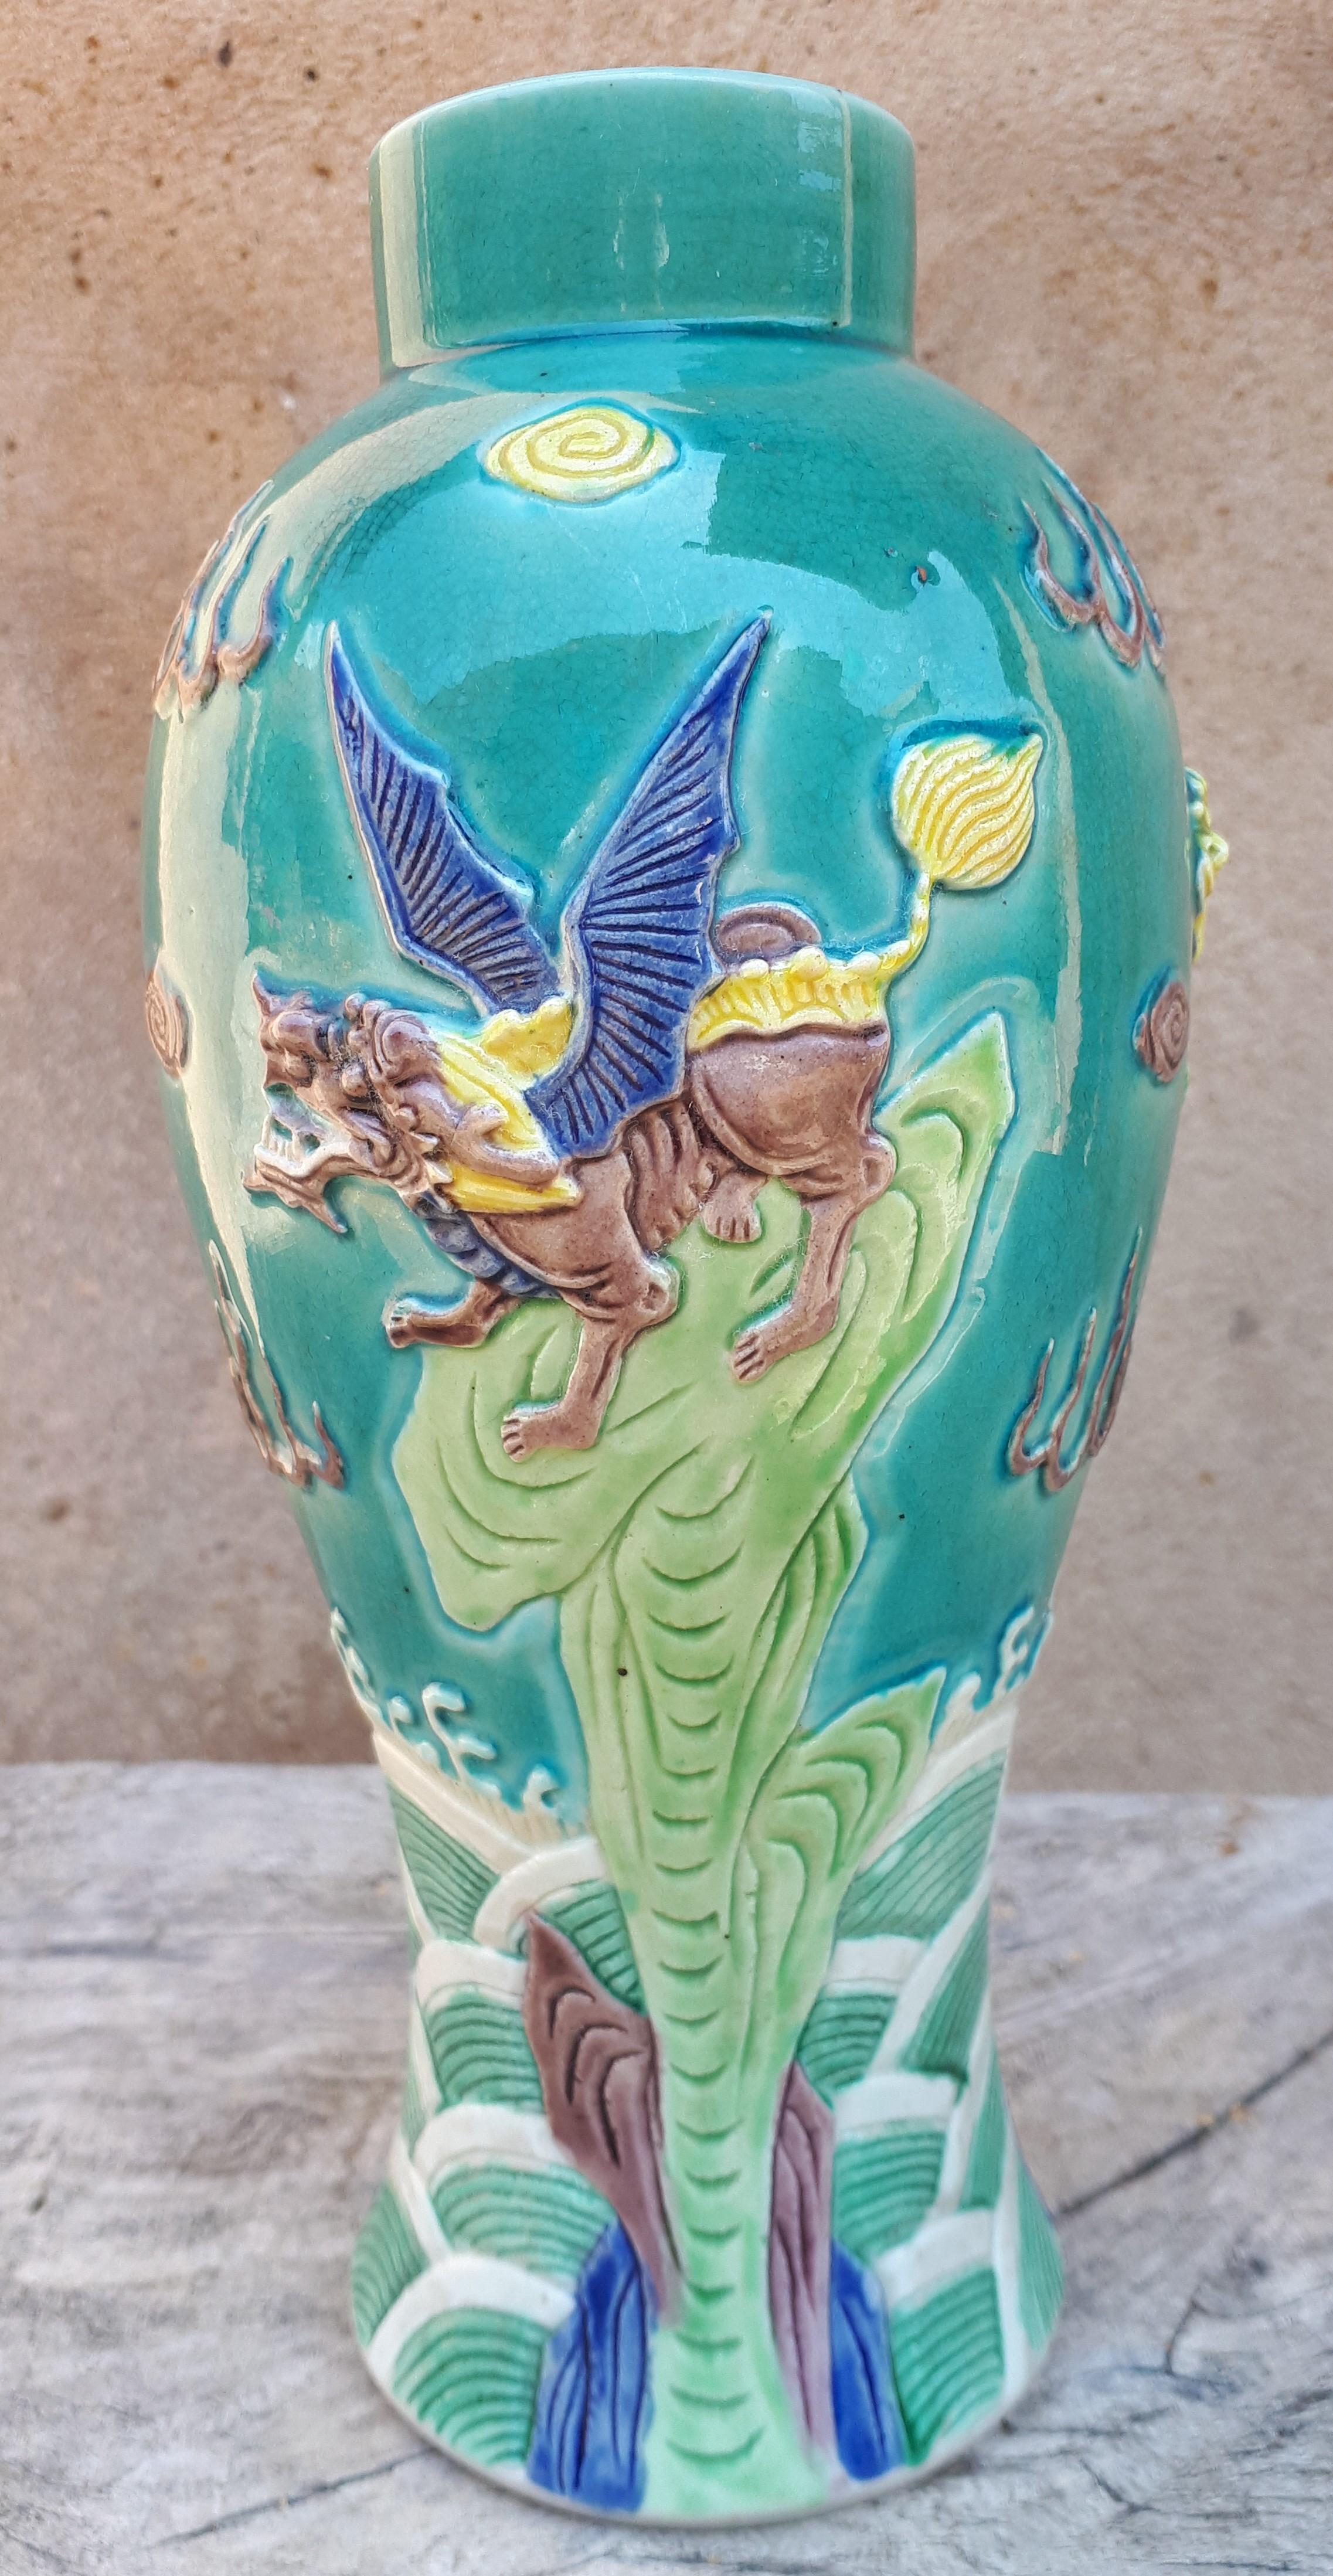 Rare porcelain vase with polychrome decoration of chimeras standing on a rock above the waves.
Four-character mark under the base : 